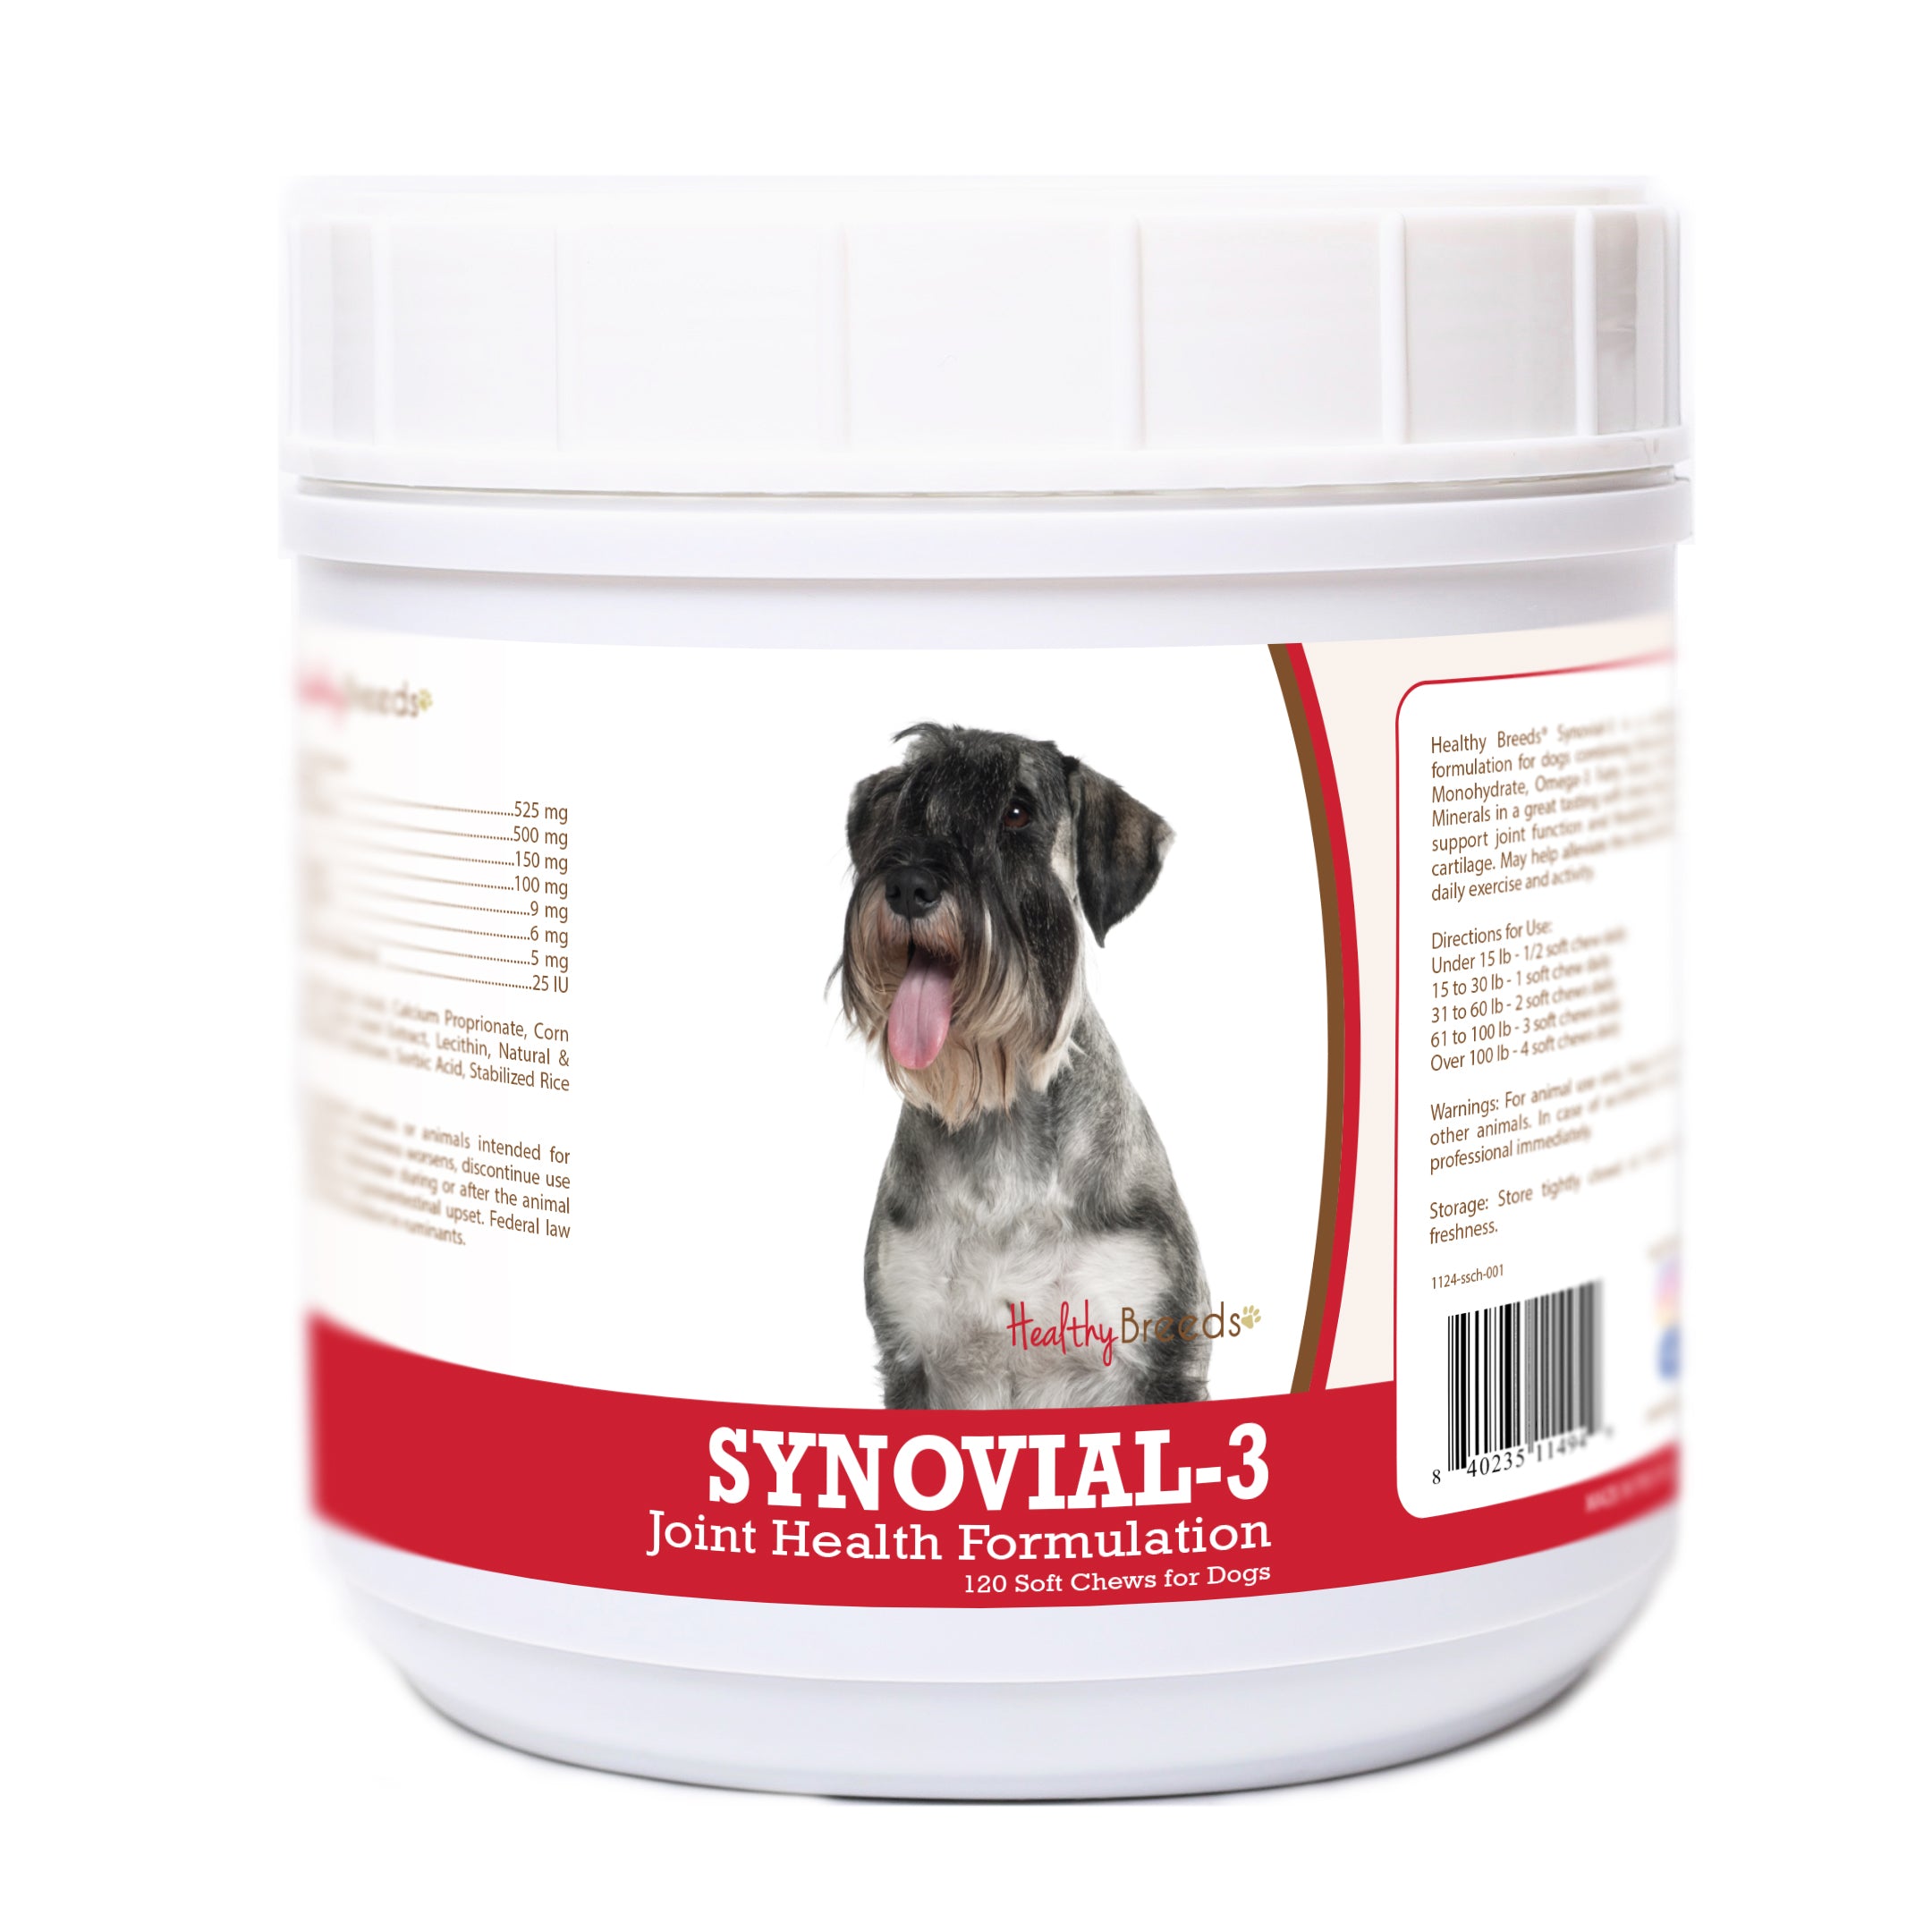 Standard Schnauzer Synovial-3 Joint Health Formulation Soft Chews 120 Count